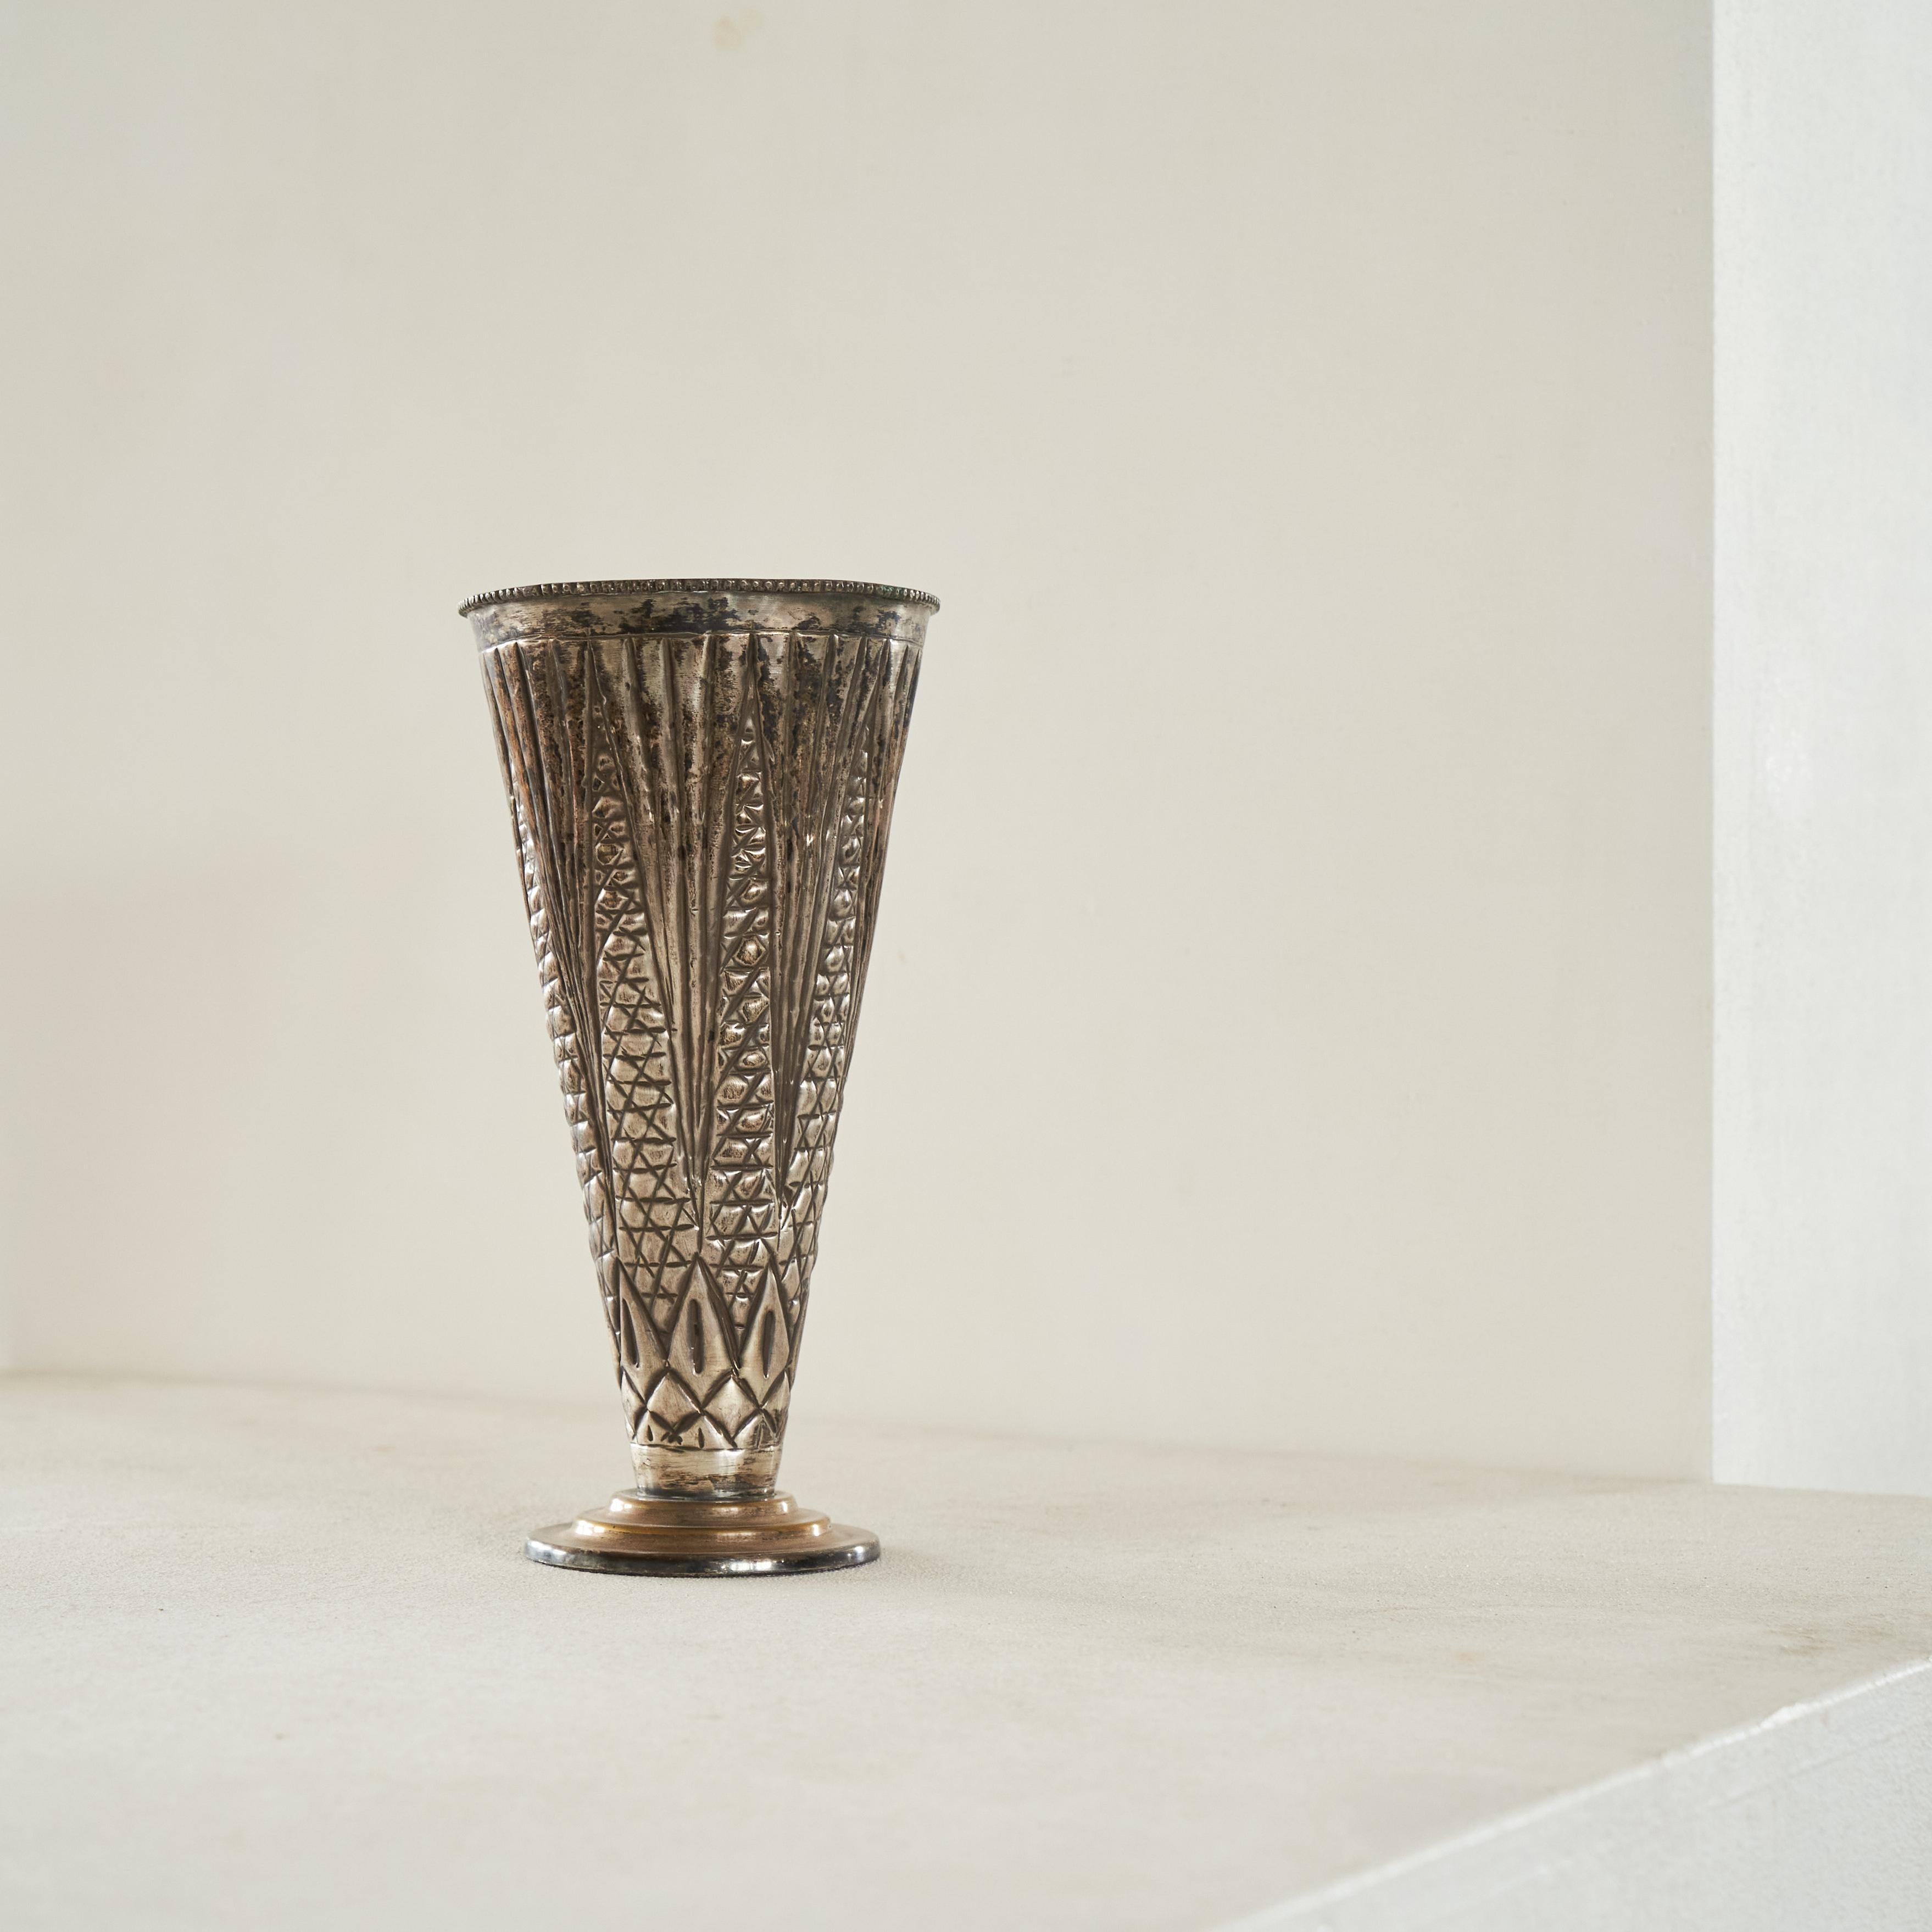 Hand-Crafted Hand Made Art Deco Vase in Patinated Silver Plate 1930s